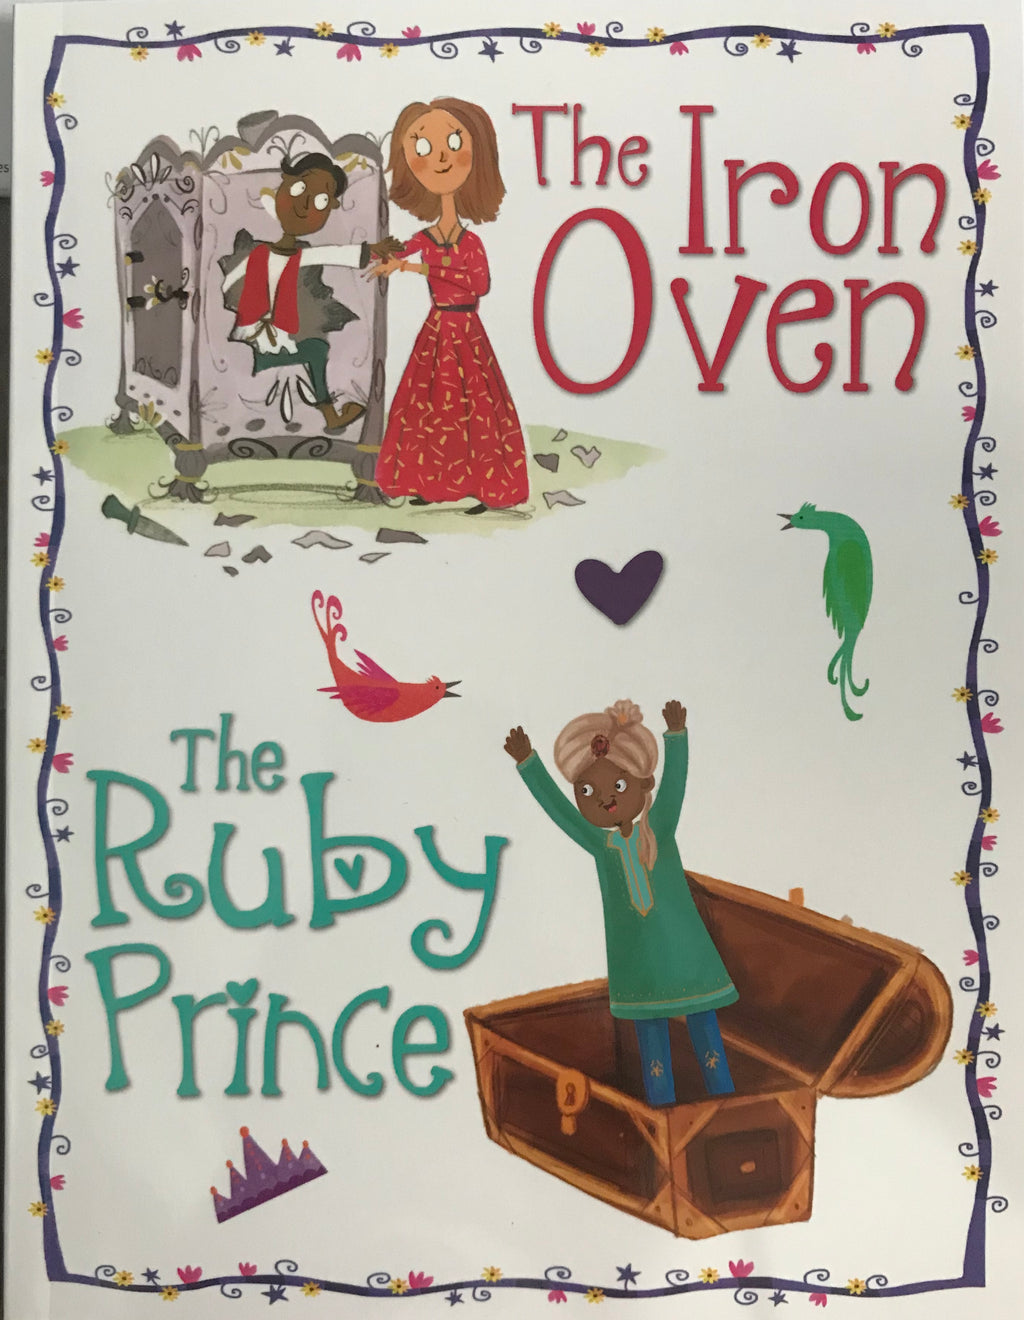 Princess Storybook (9): The Iron Oven & The Ruby Prince